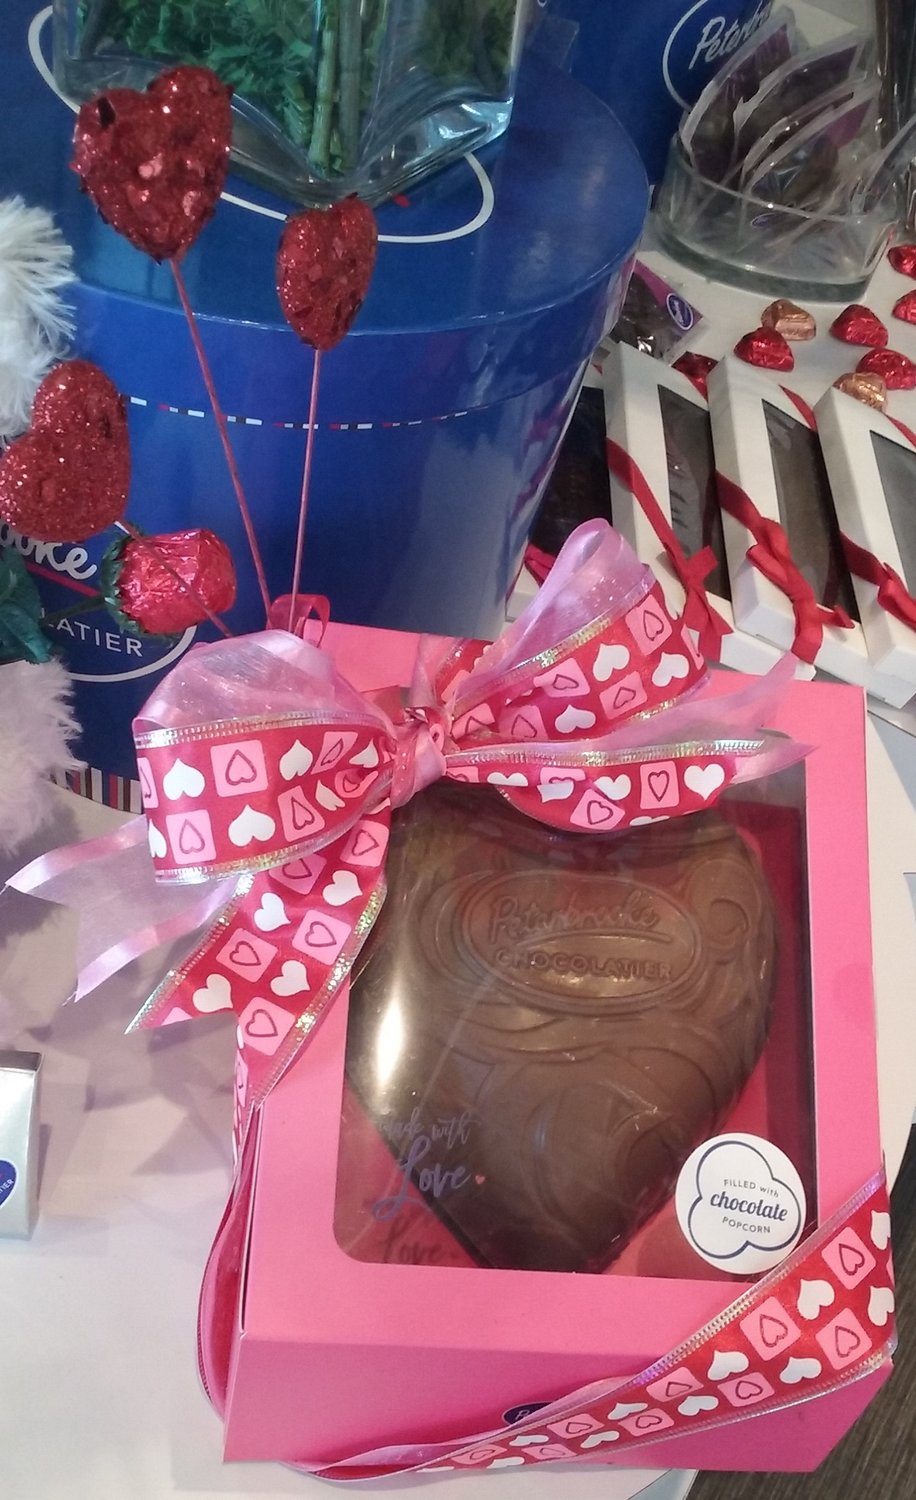 Large chocolate hearts are filled with one of Peterbrooke Chocolatier’s most popular items: chocolate-dipped popcorn.